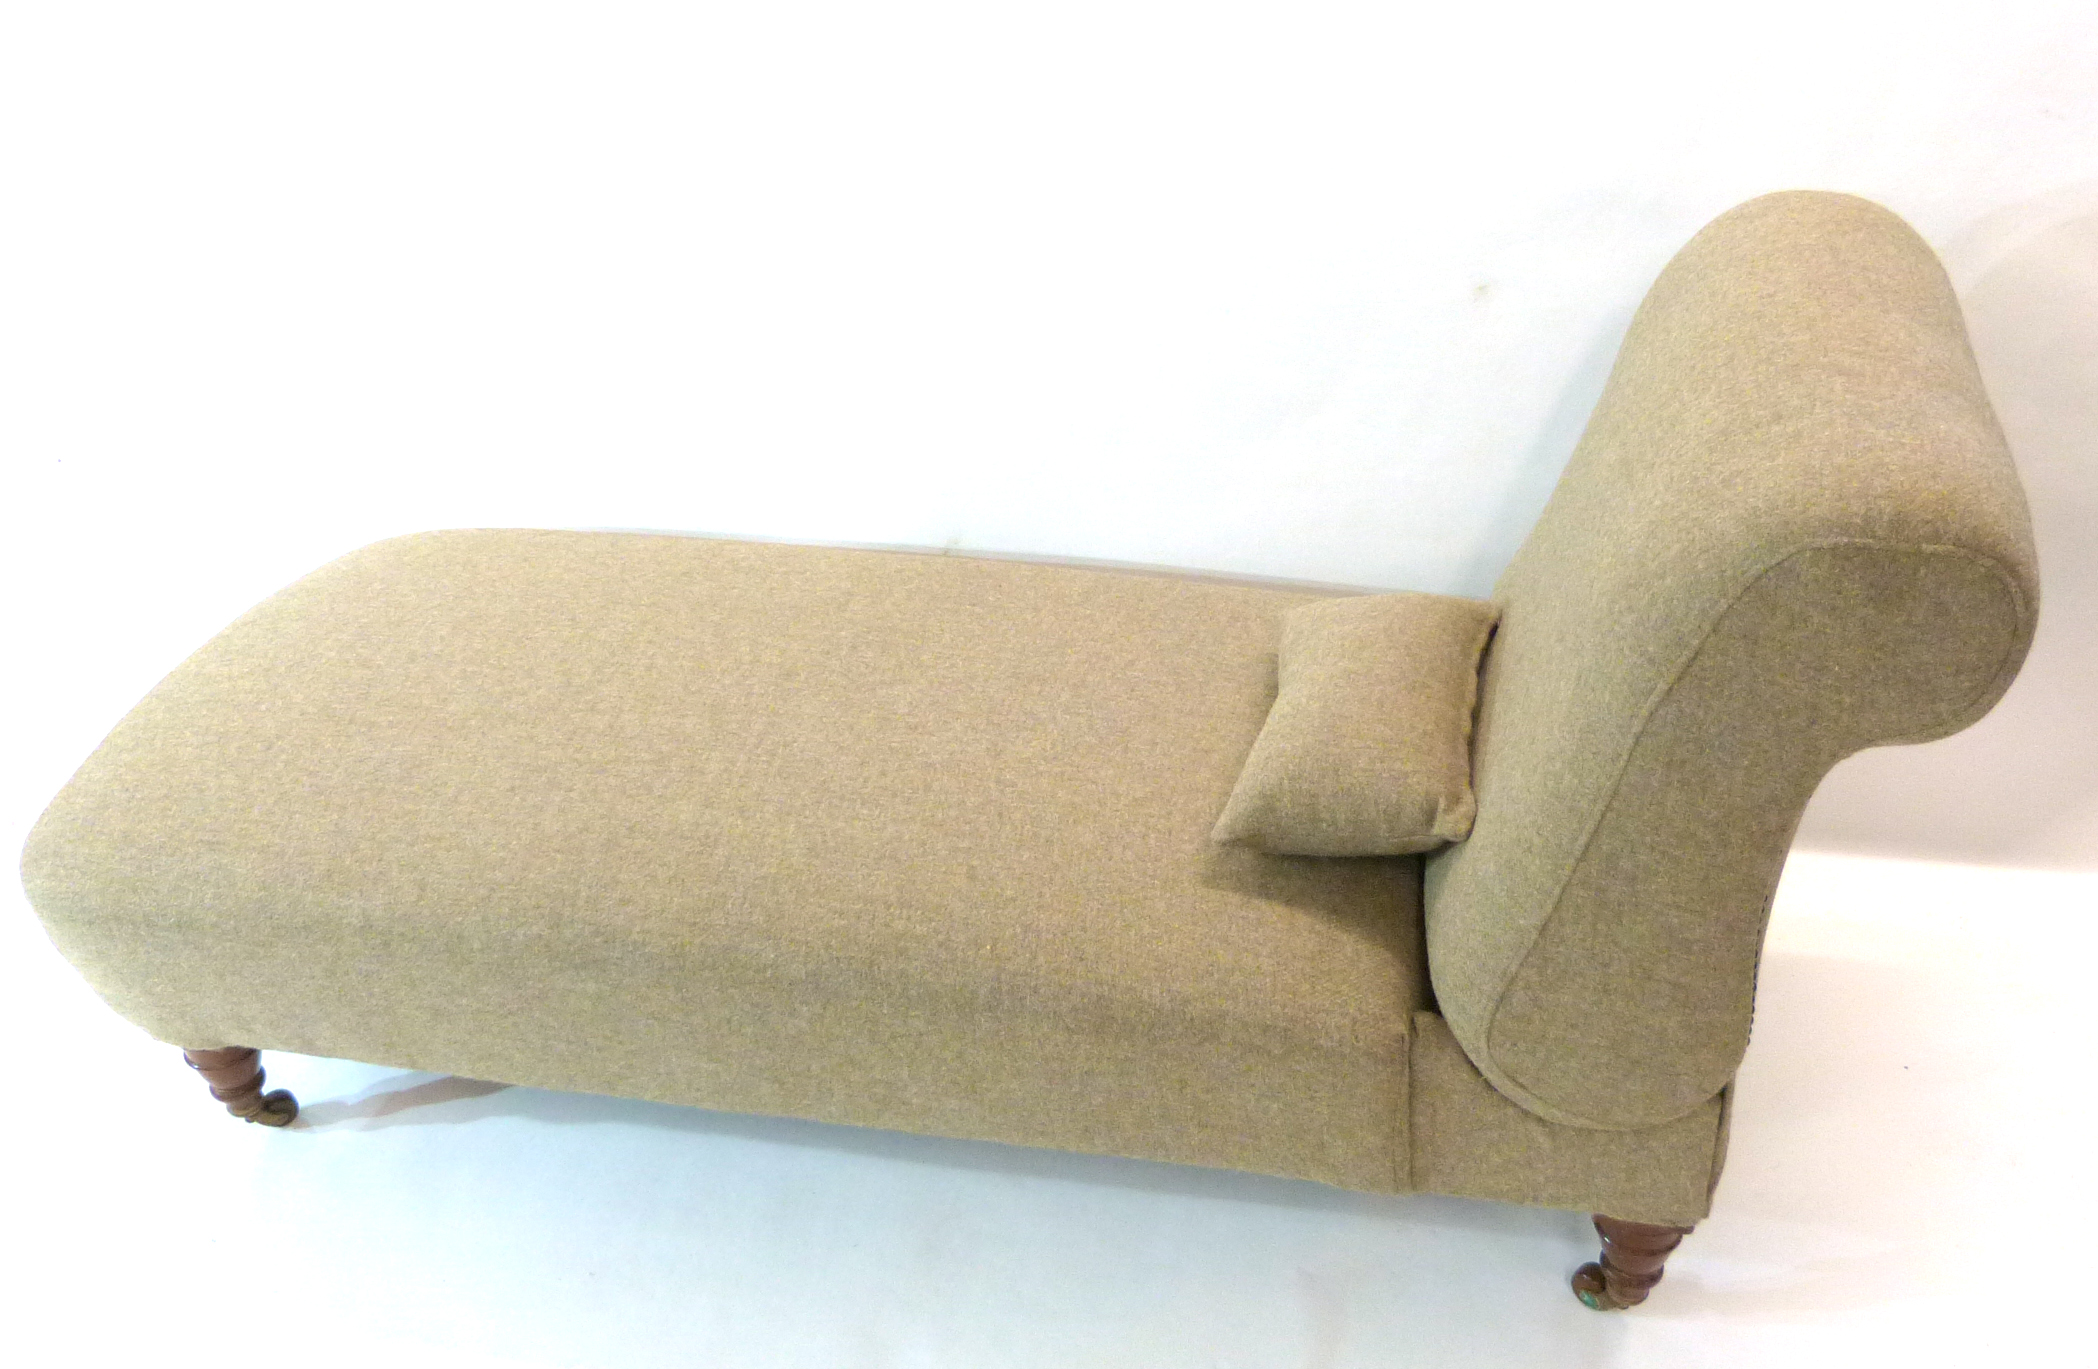 Victorian chaise longue with adjustable backrest, recently re-upholstered in pale Harris tweed - Image 6 of 8